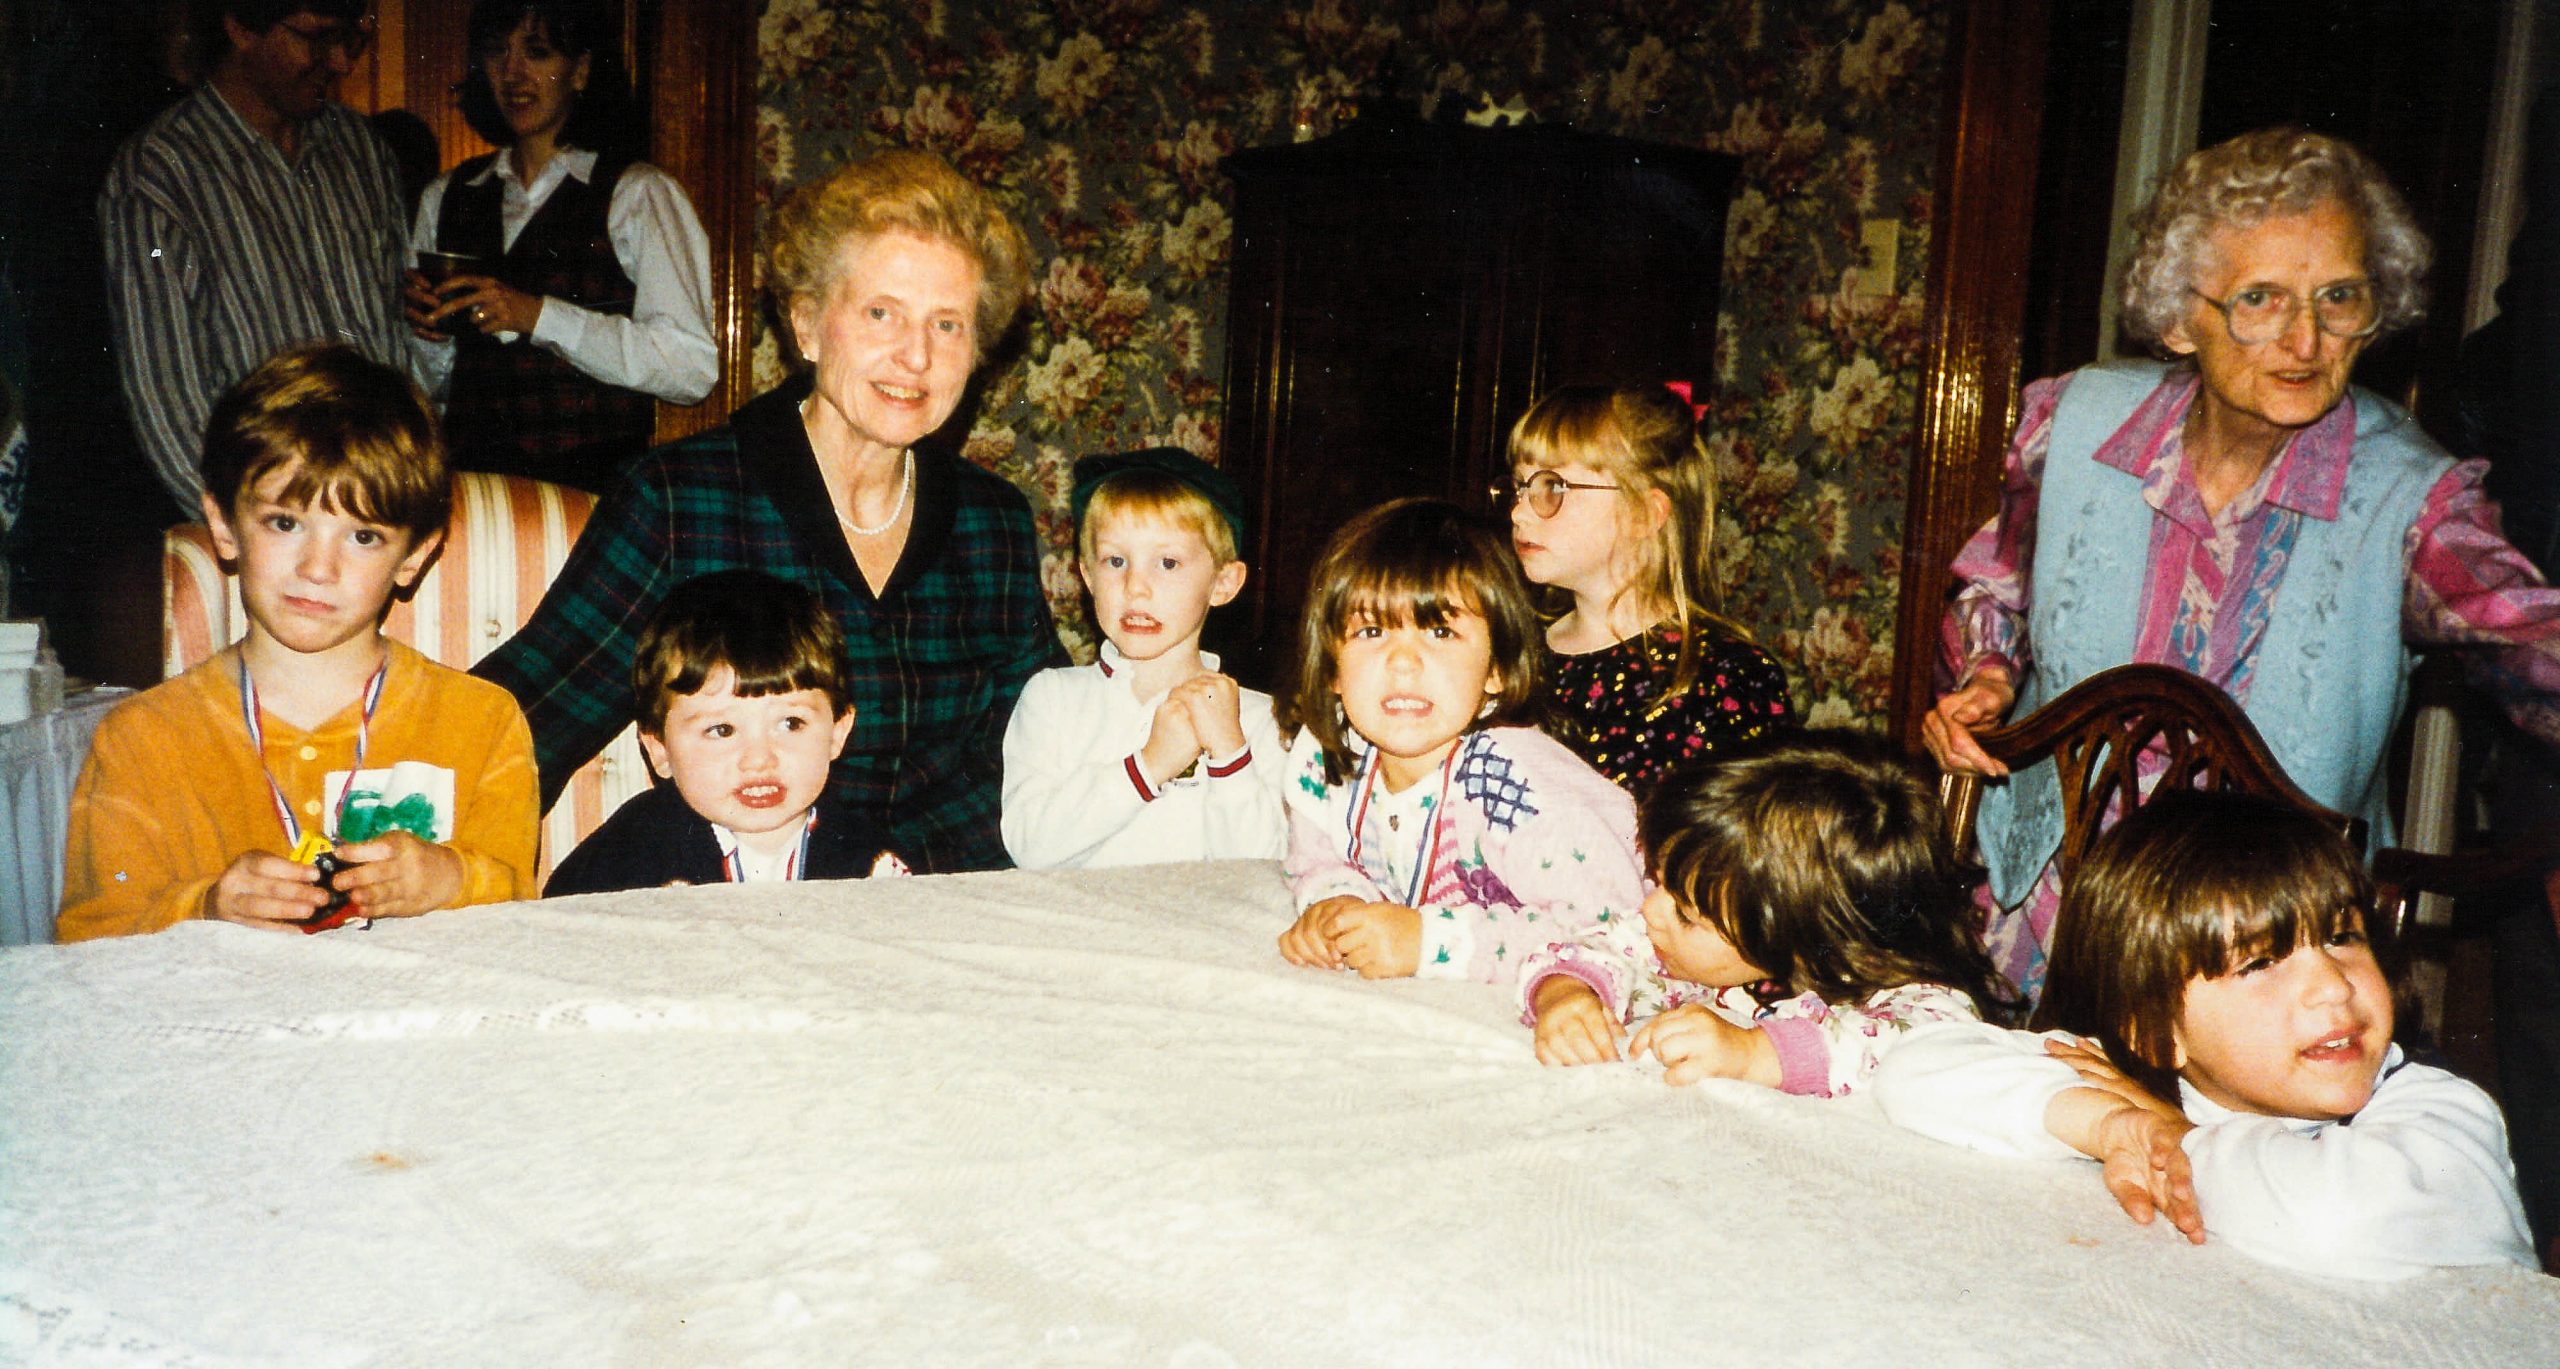 Sister Kay with some of her grand-nieces and -nephews at her 55th birthday party in 1991. To her right is her sister Marge, who was grandmother to some of the children.